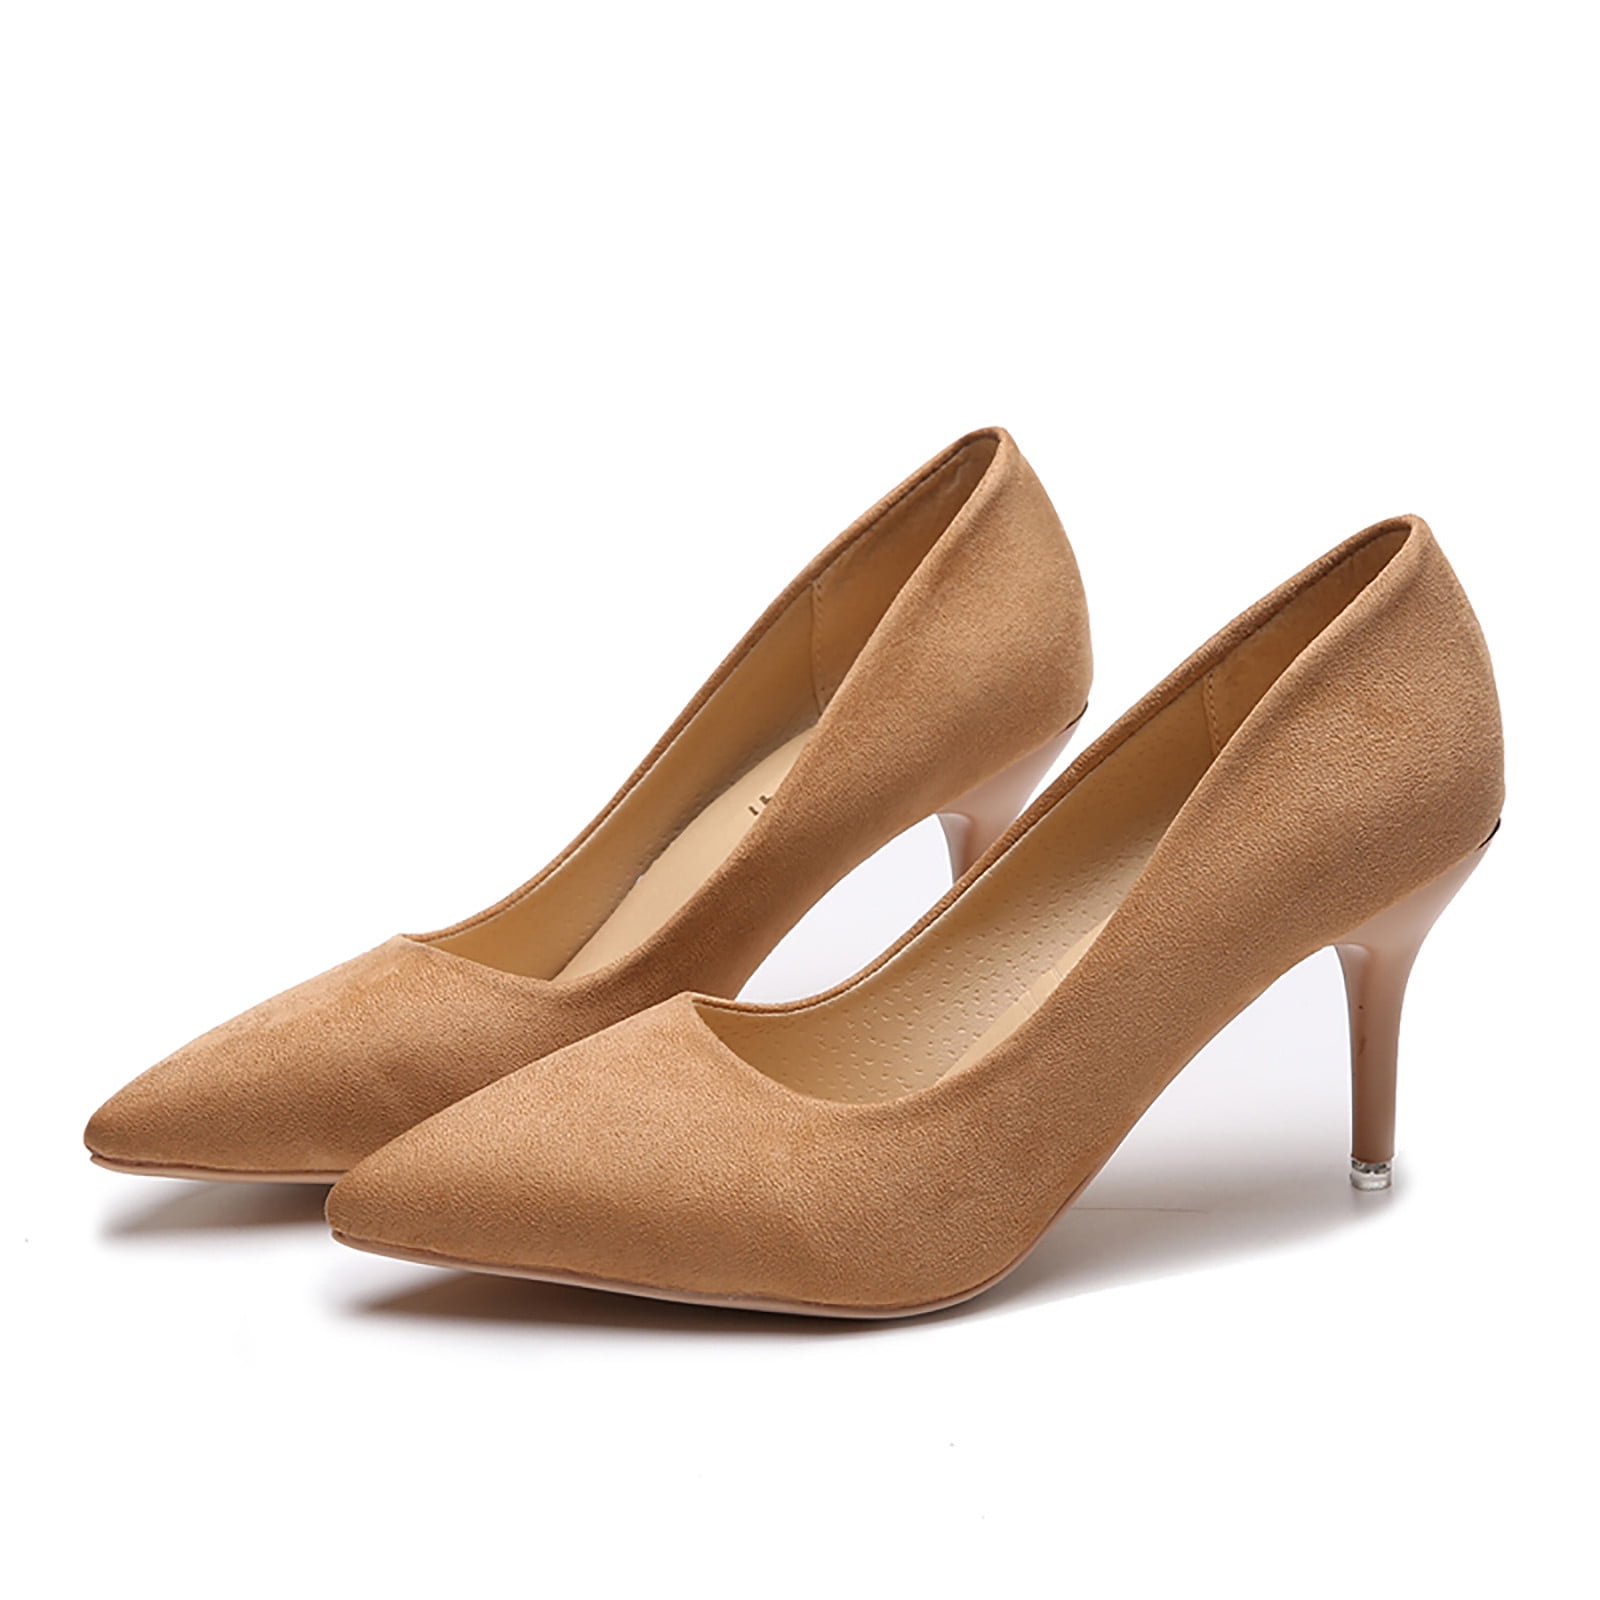 adviicd Heels 1 Inch Ladies Fashion Colorblock Leather Pointed Toe Pumps  Thick High Heel Casual Tan Heels for Women - Walmart.com